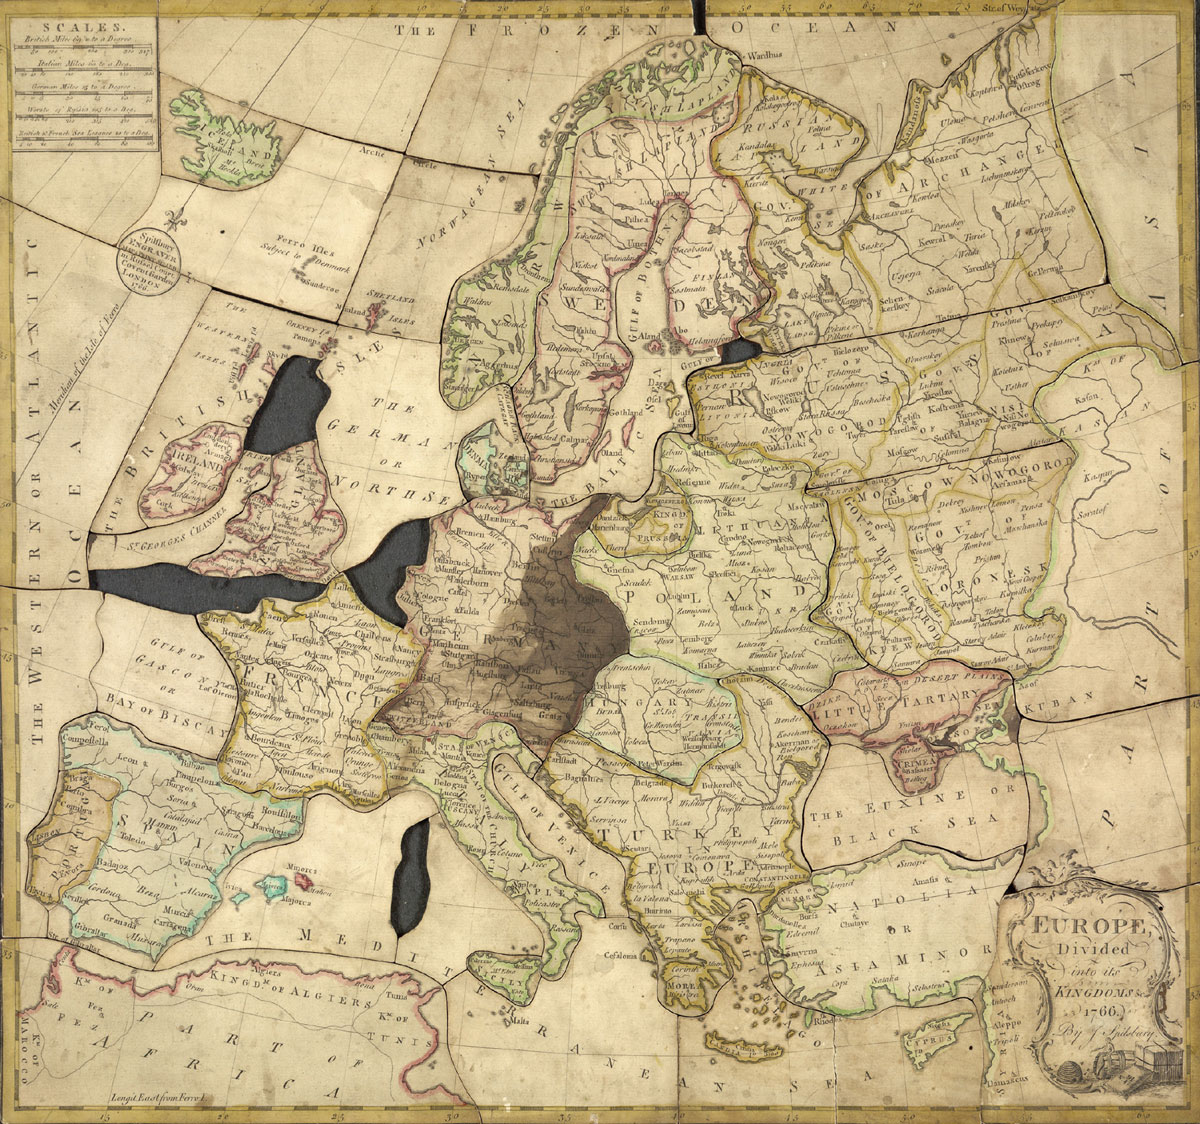 A dissected and mounted map from circa 1766 by John Spilsbury, considered the inventor of the world's first jigsaw puzzle, titled “Europe Divided into its Kingdoms.”